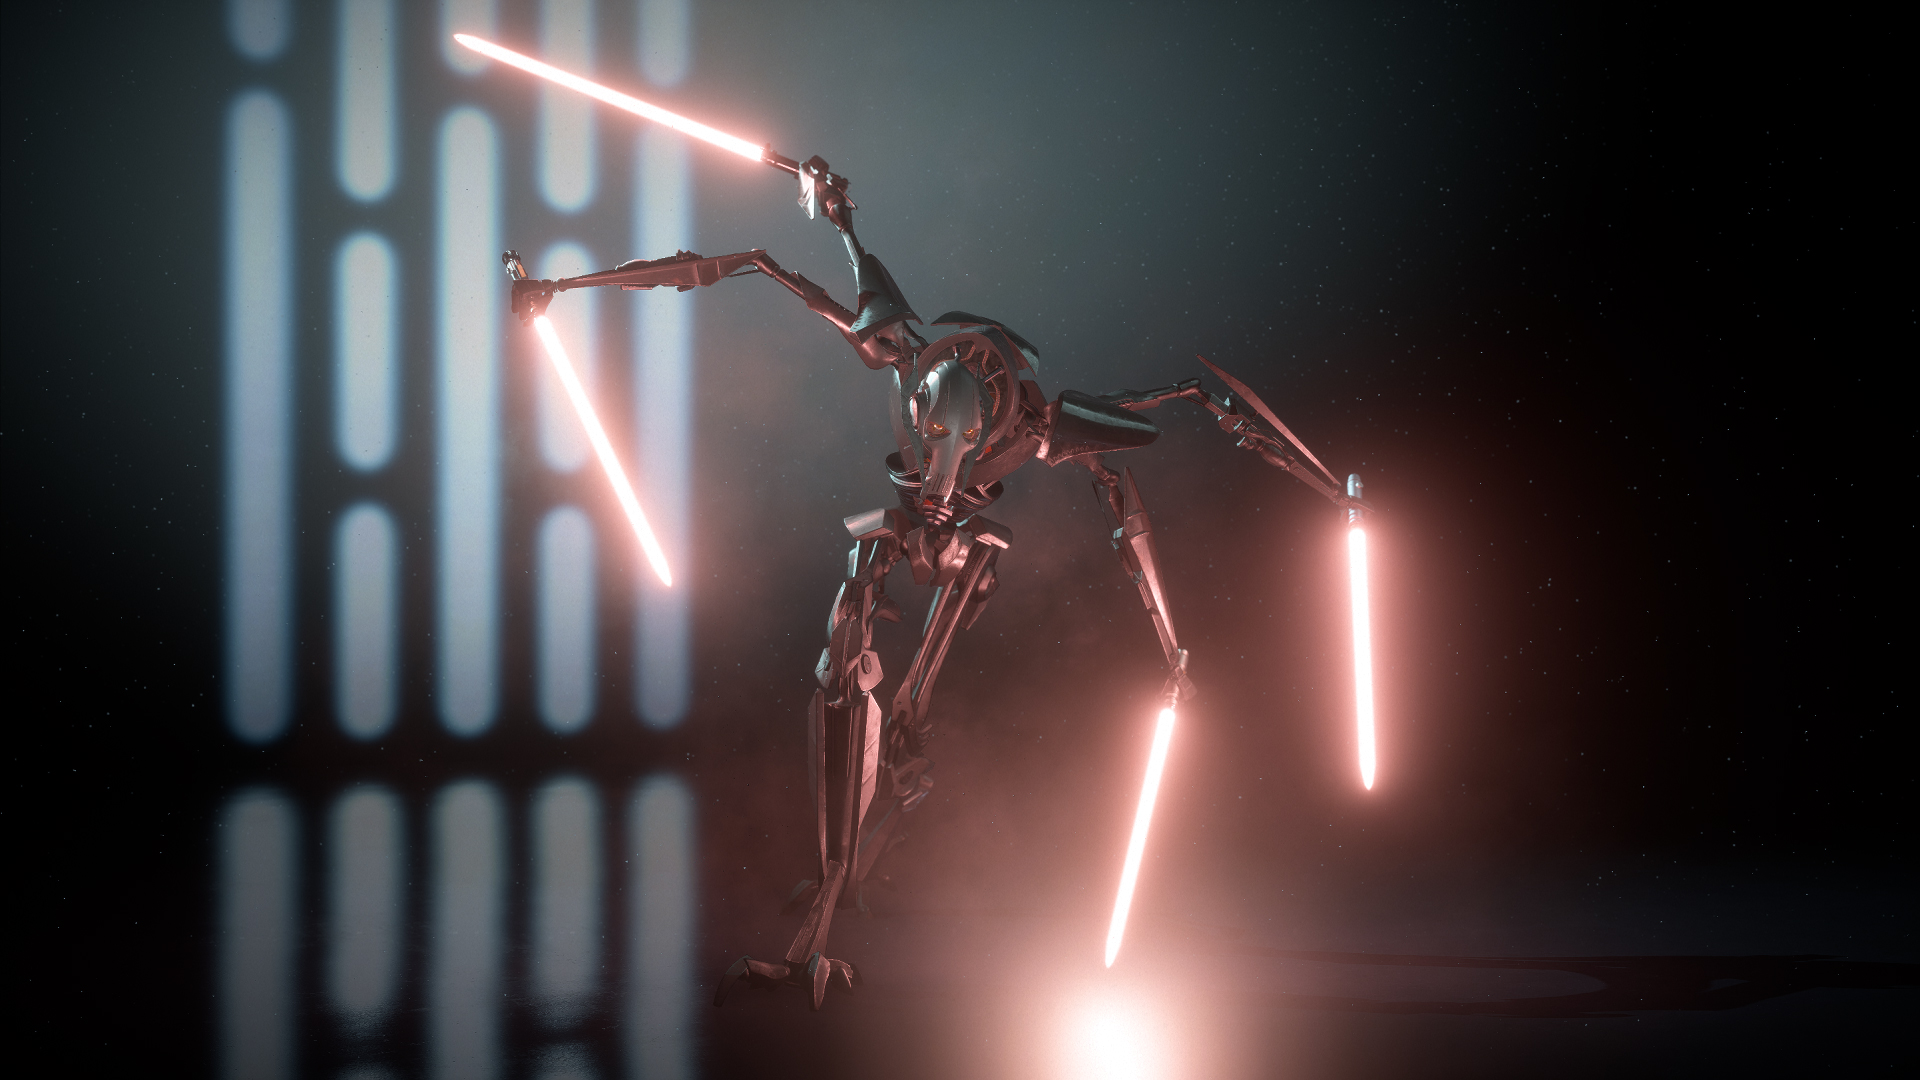 General Grievous Sith attacking